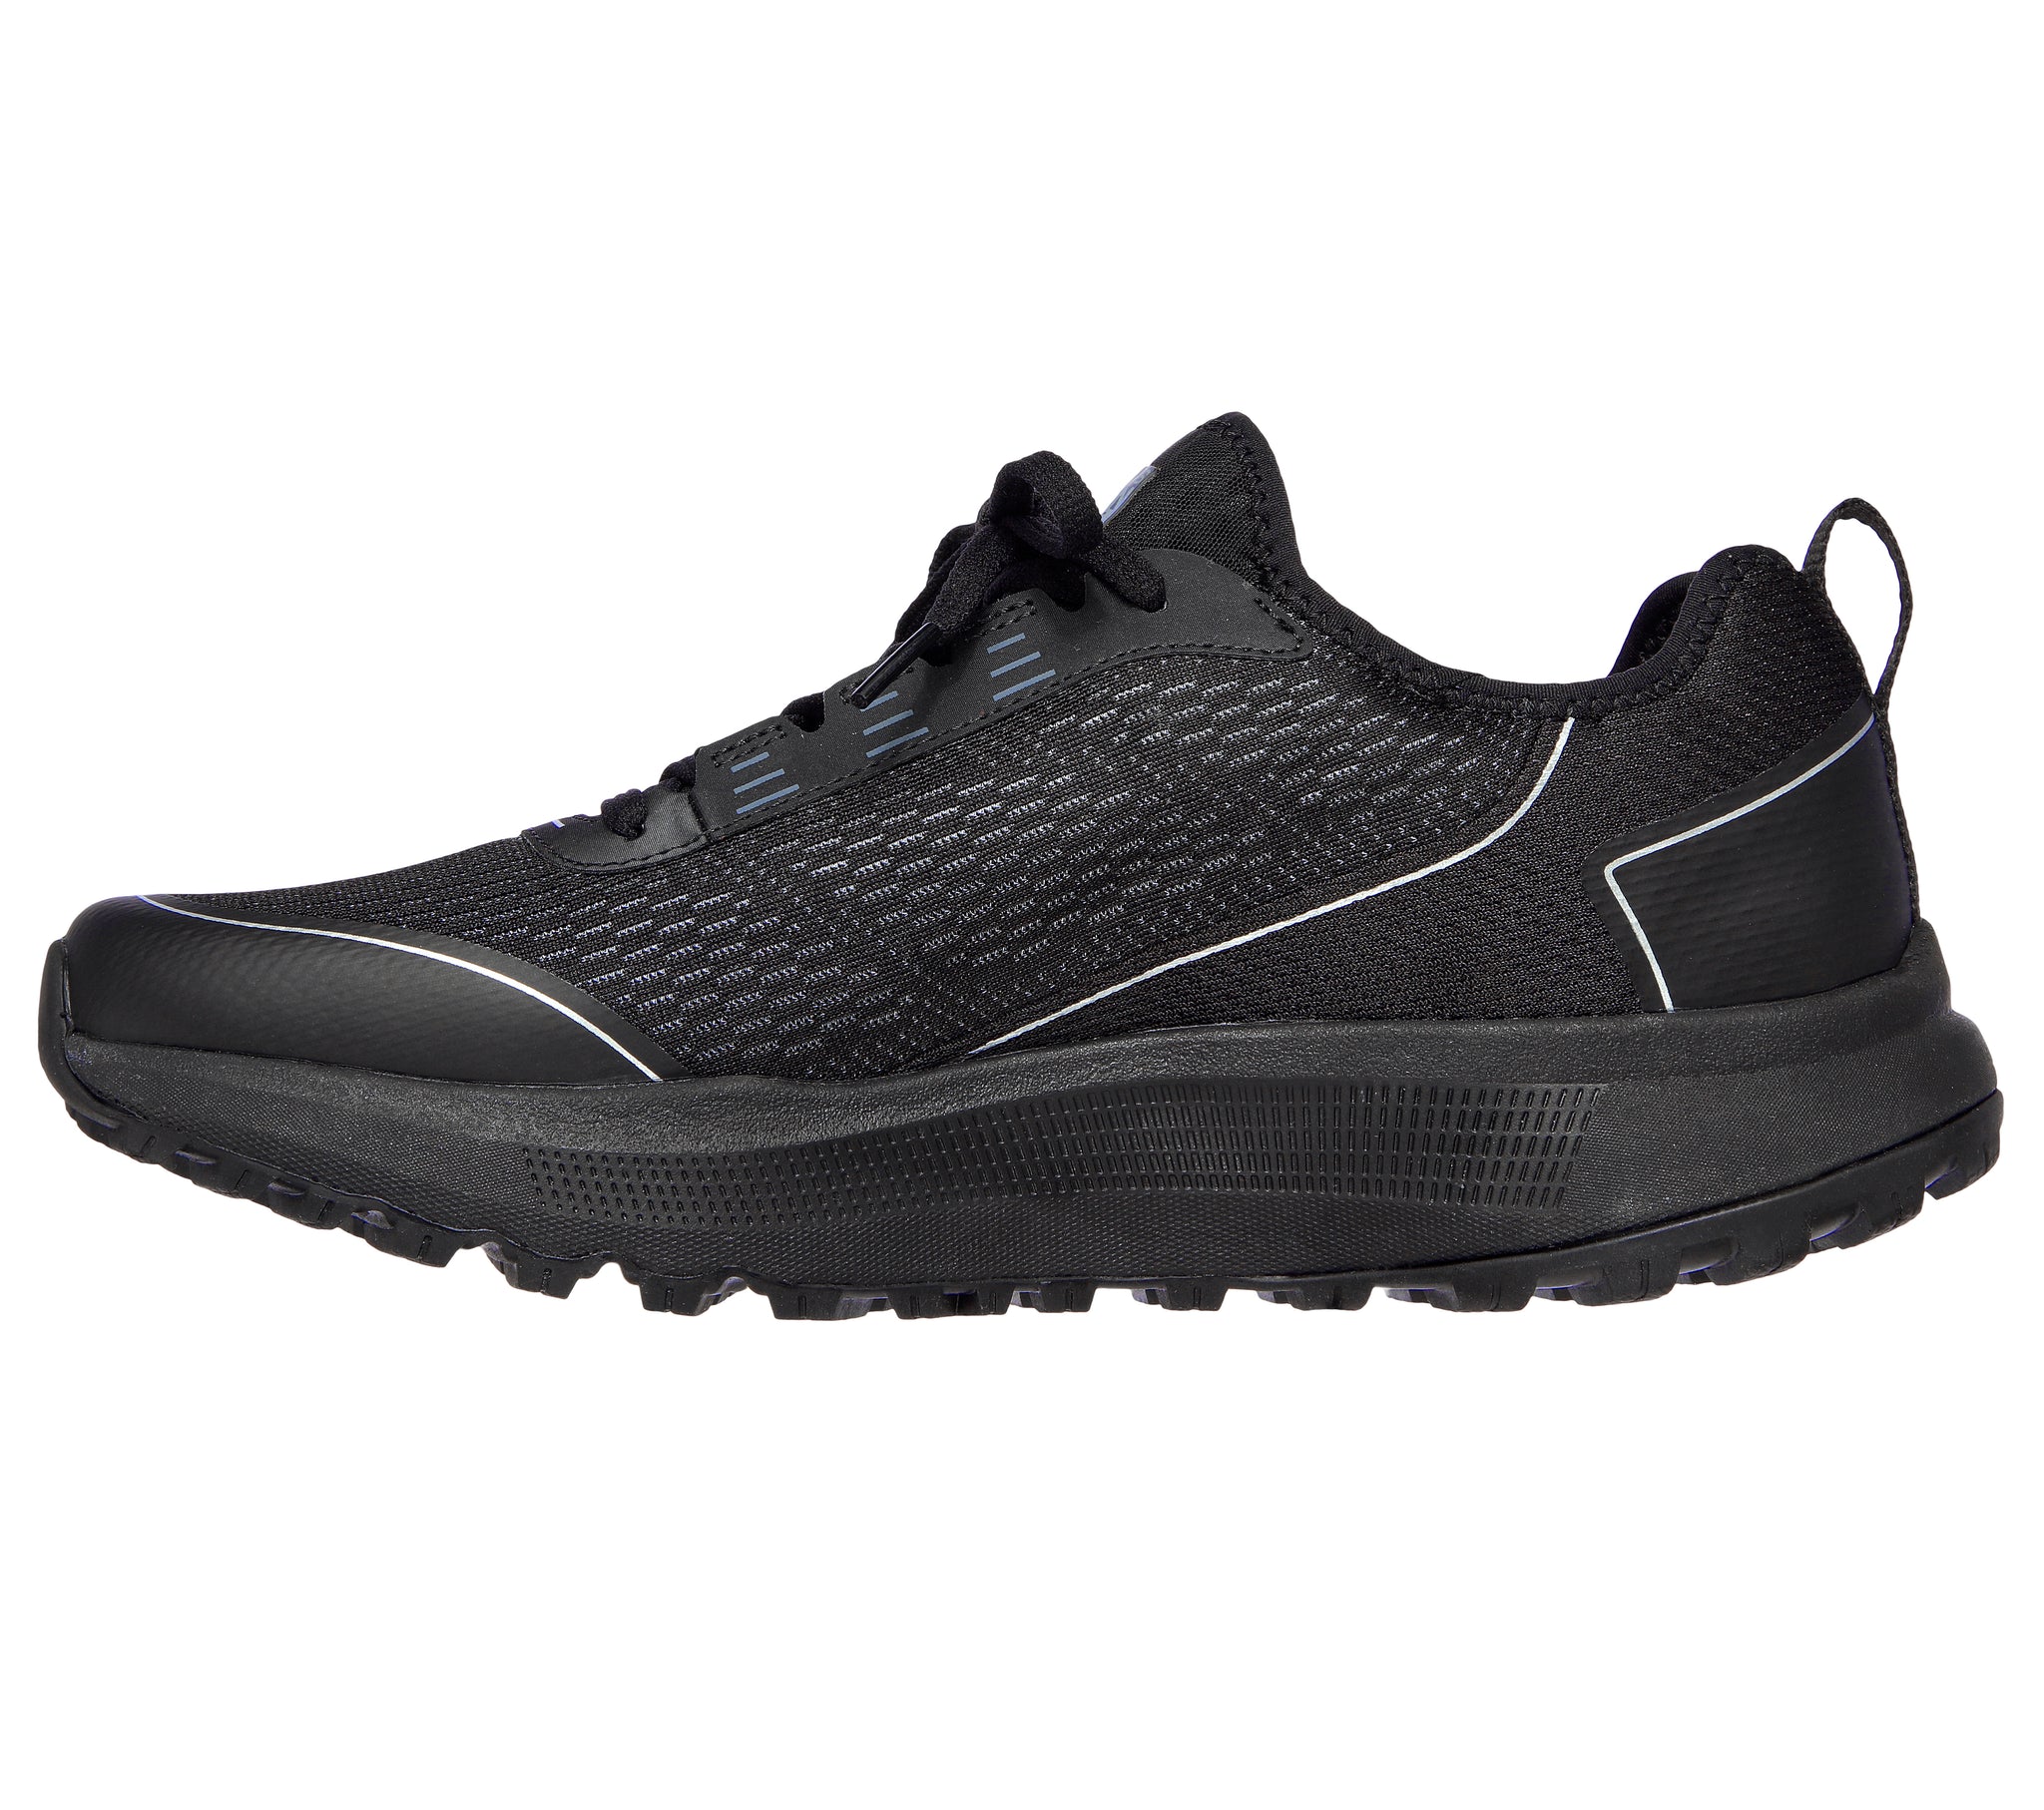 220149 - SKECHERS GORUN PULSE TRAIL - EXPEDITION - Shoess